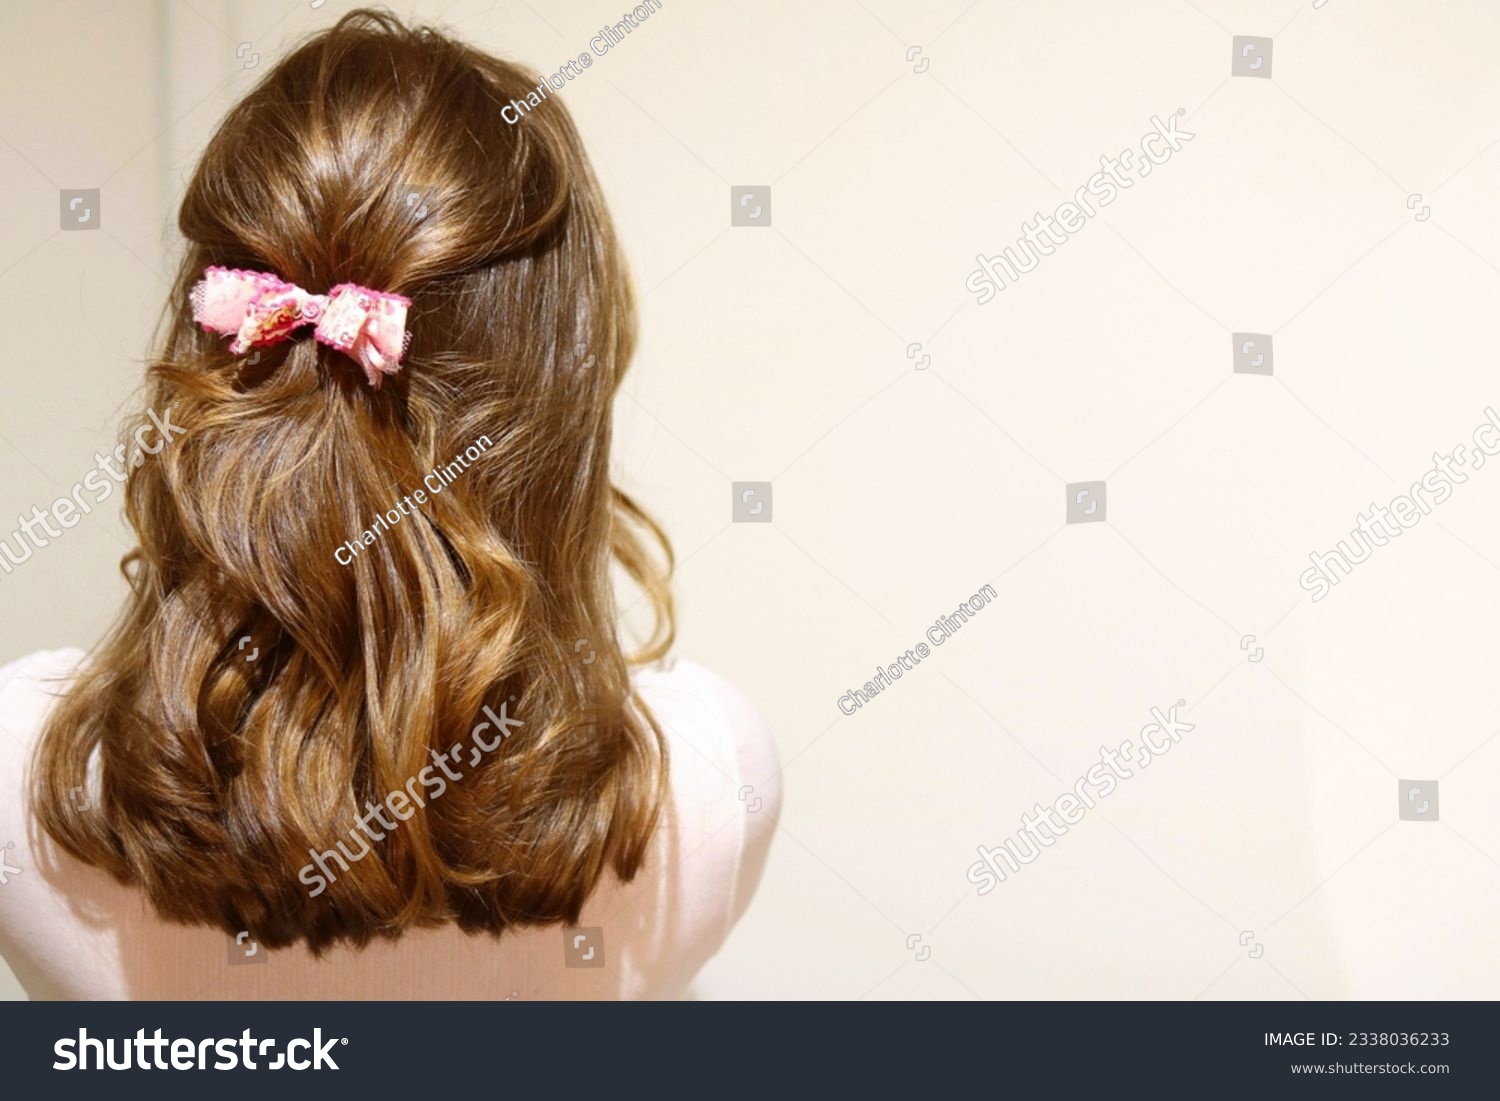 Young blonde woman with hair styled half-back, secured with a bow clip. Valentines day hairstyle. Sweet hairstyle. Healthy, glossy hair. Cool vintage filter.  #2338036233